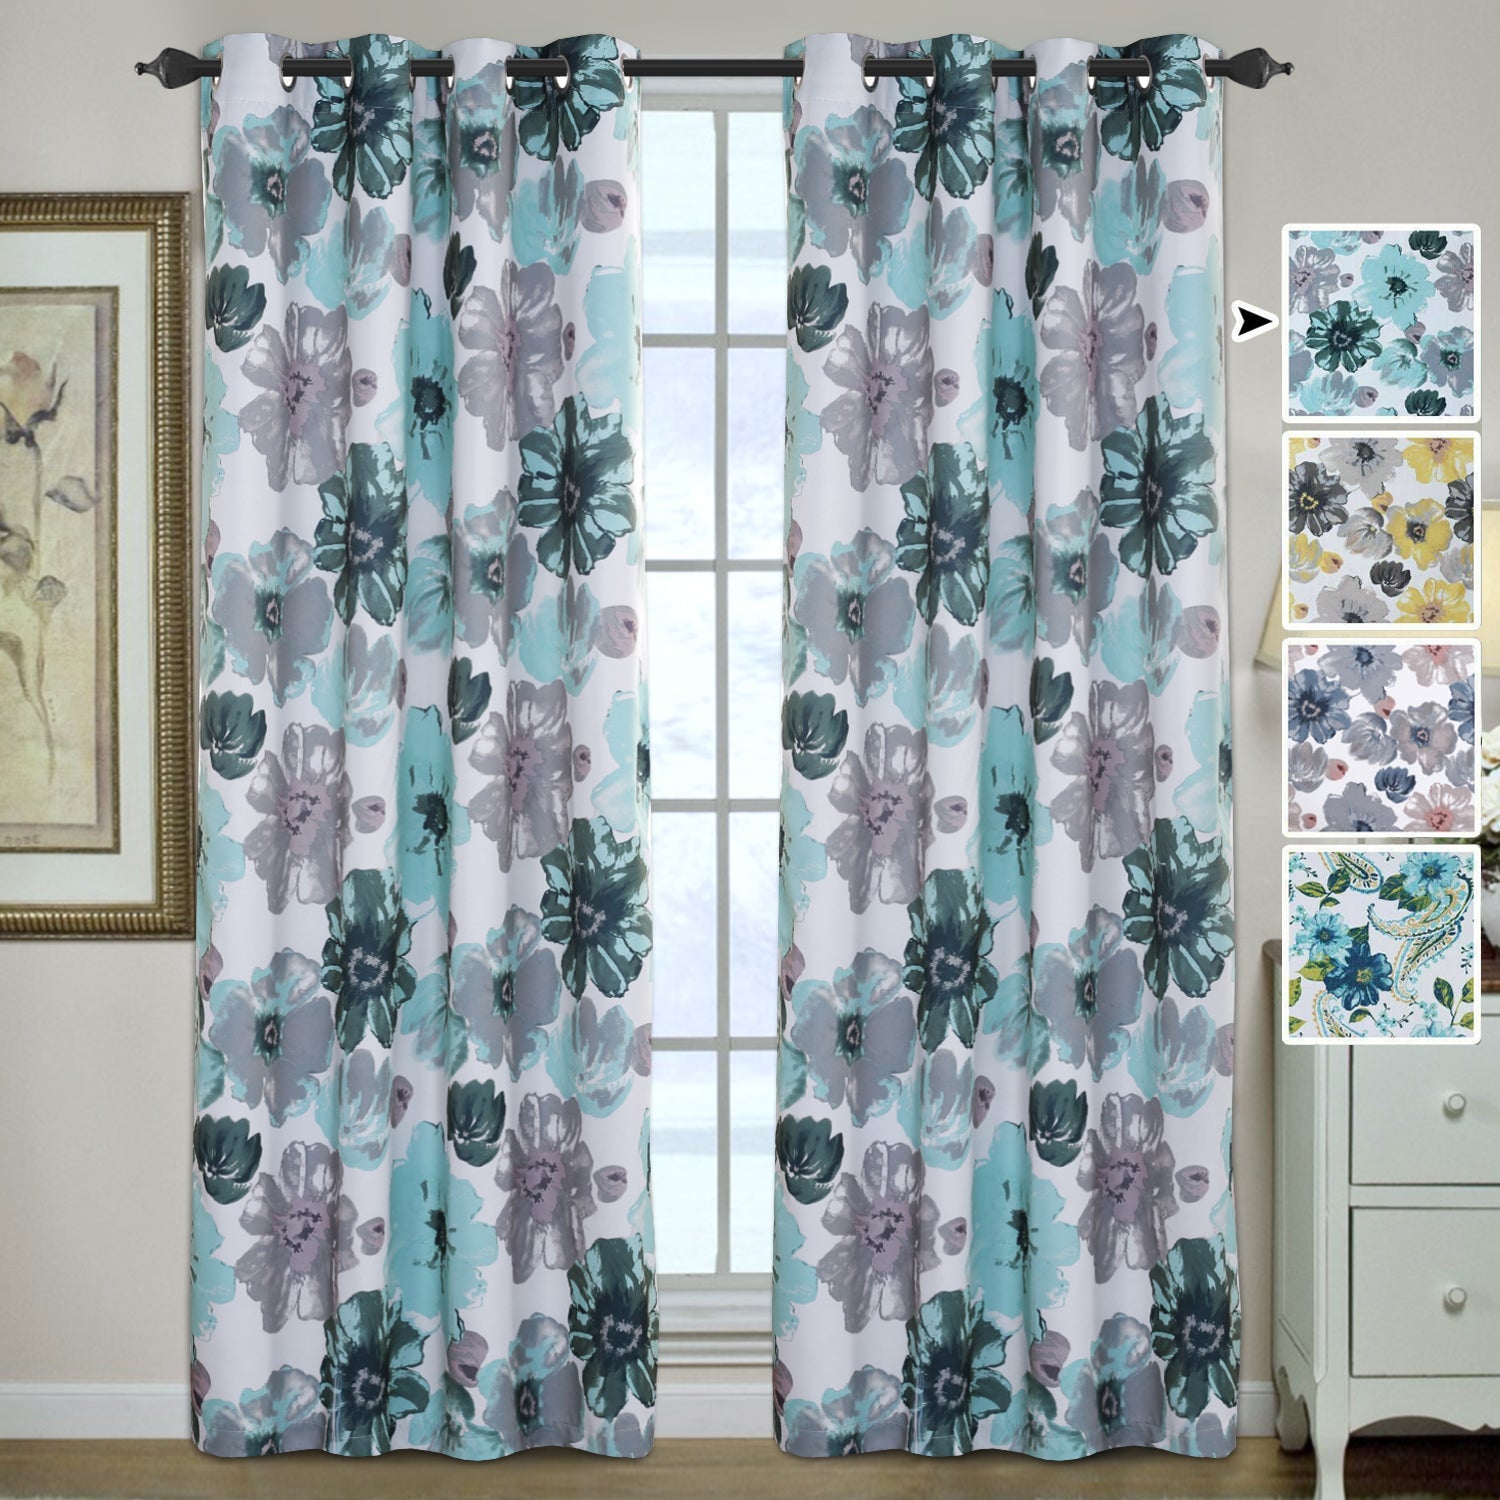 2x Blockout Floral Curtains Eyelet Blackout Curtain Draperies for Living Bedroom